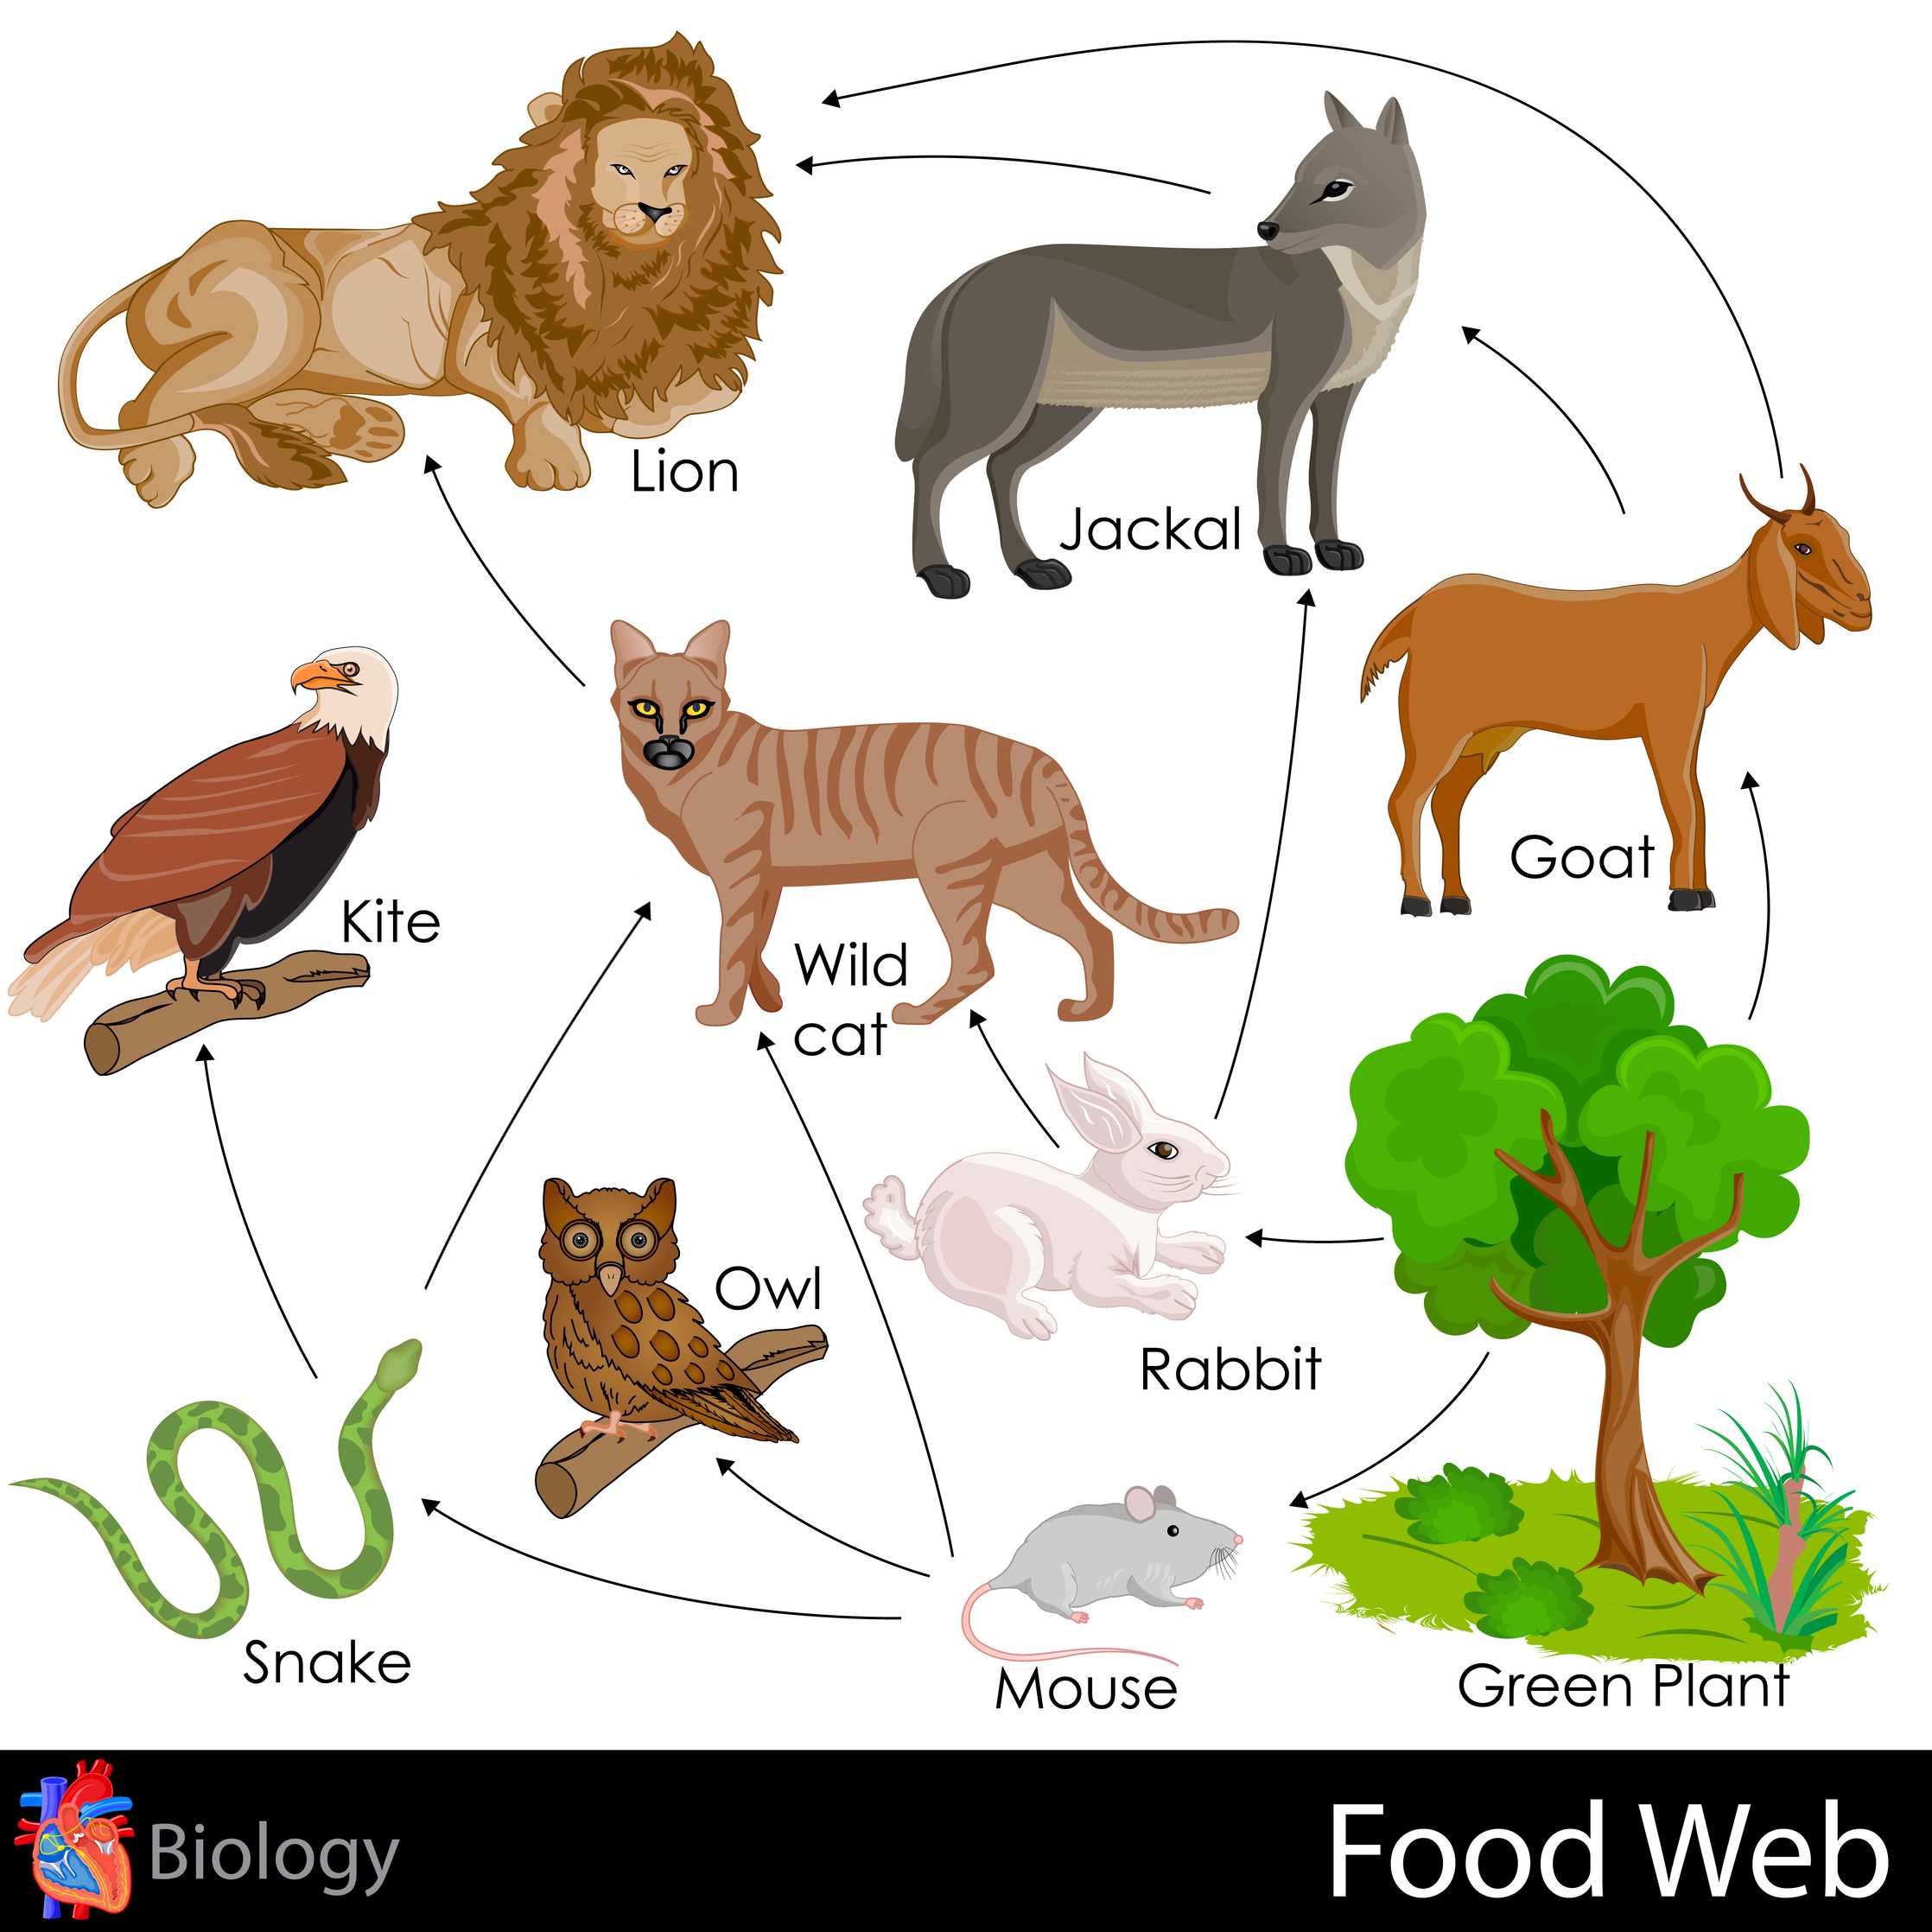 Food Web Worksheet Answers or Food Web the Best Worksheets Image Collection